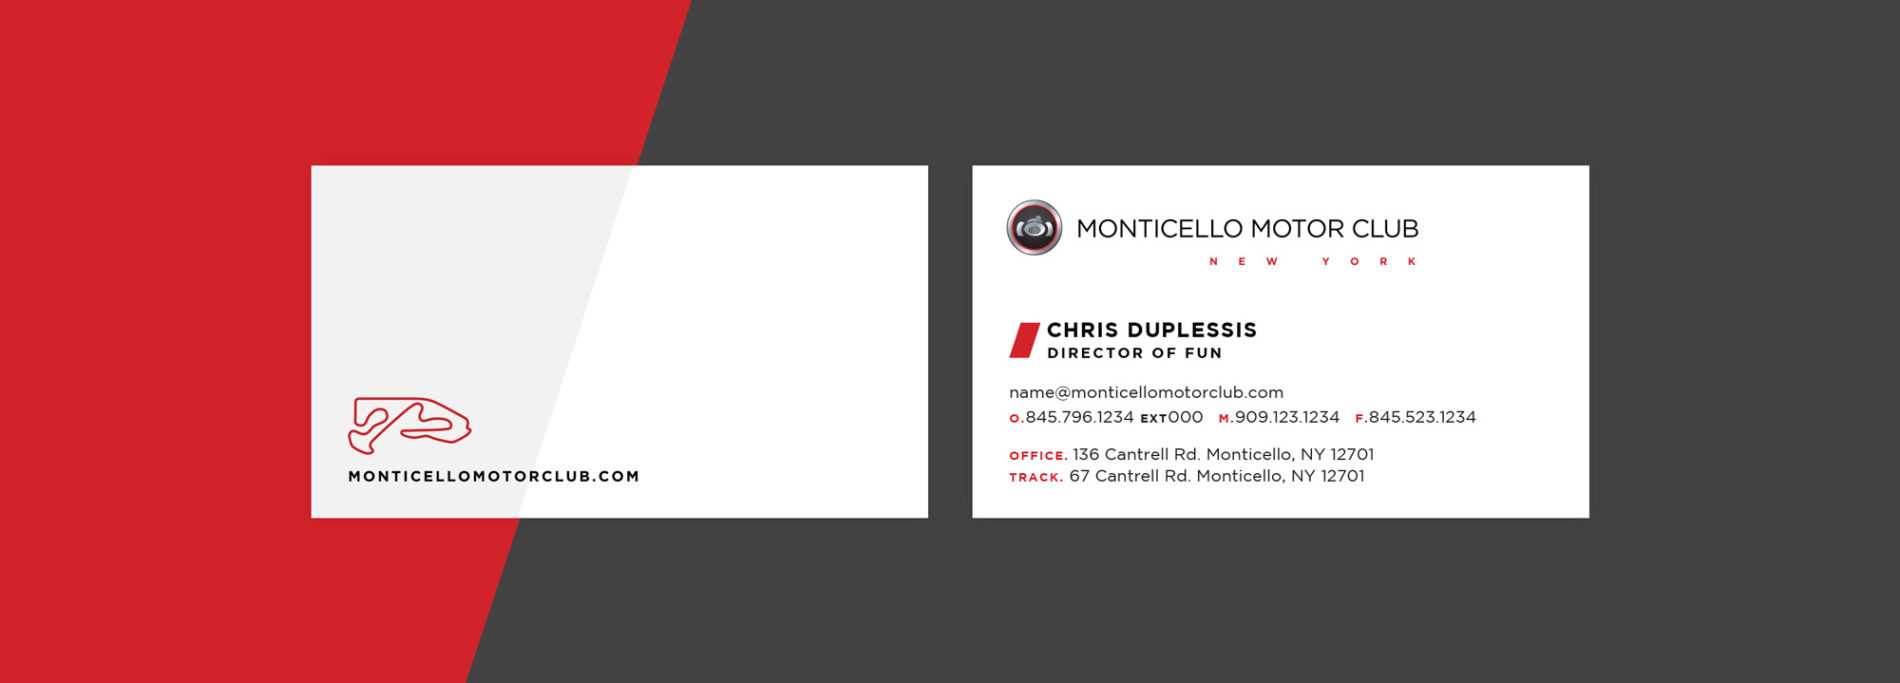 A front and back view of a MMC business card